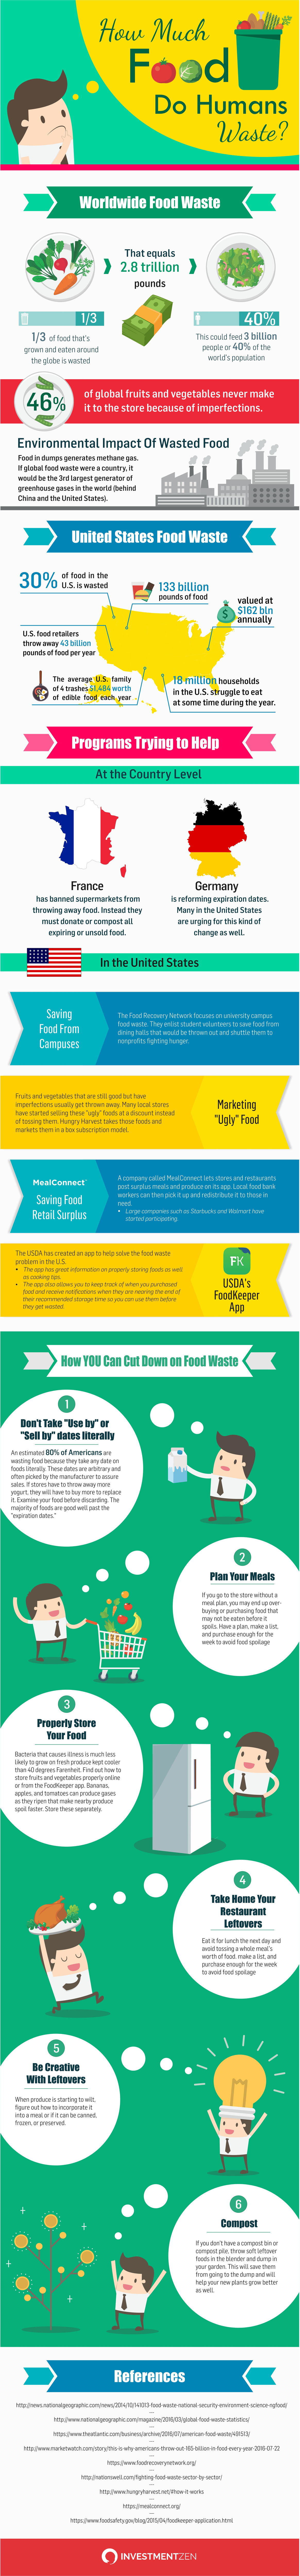 solving the food waste problem